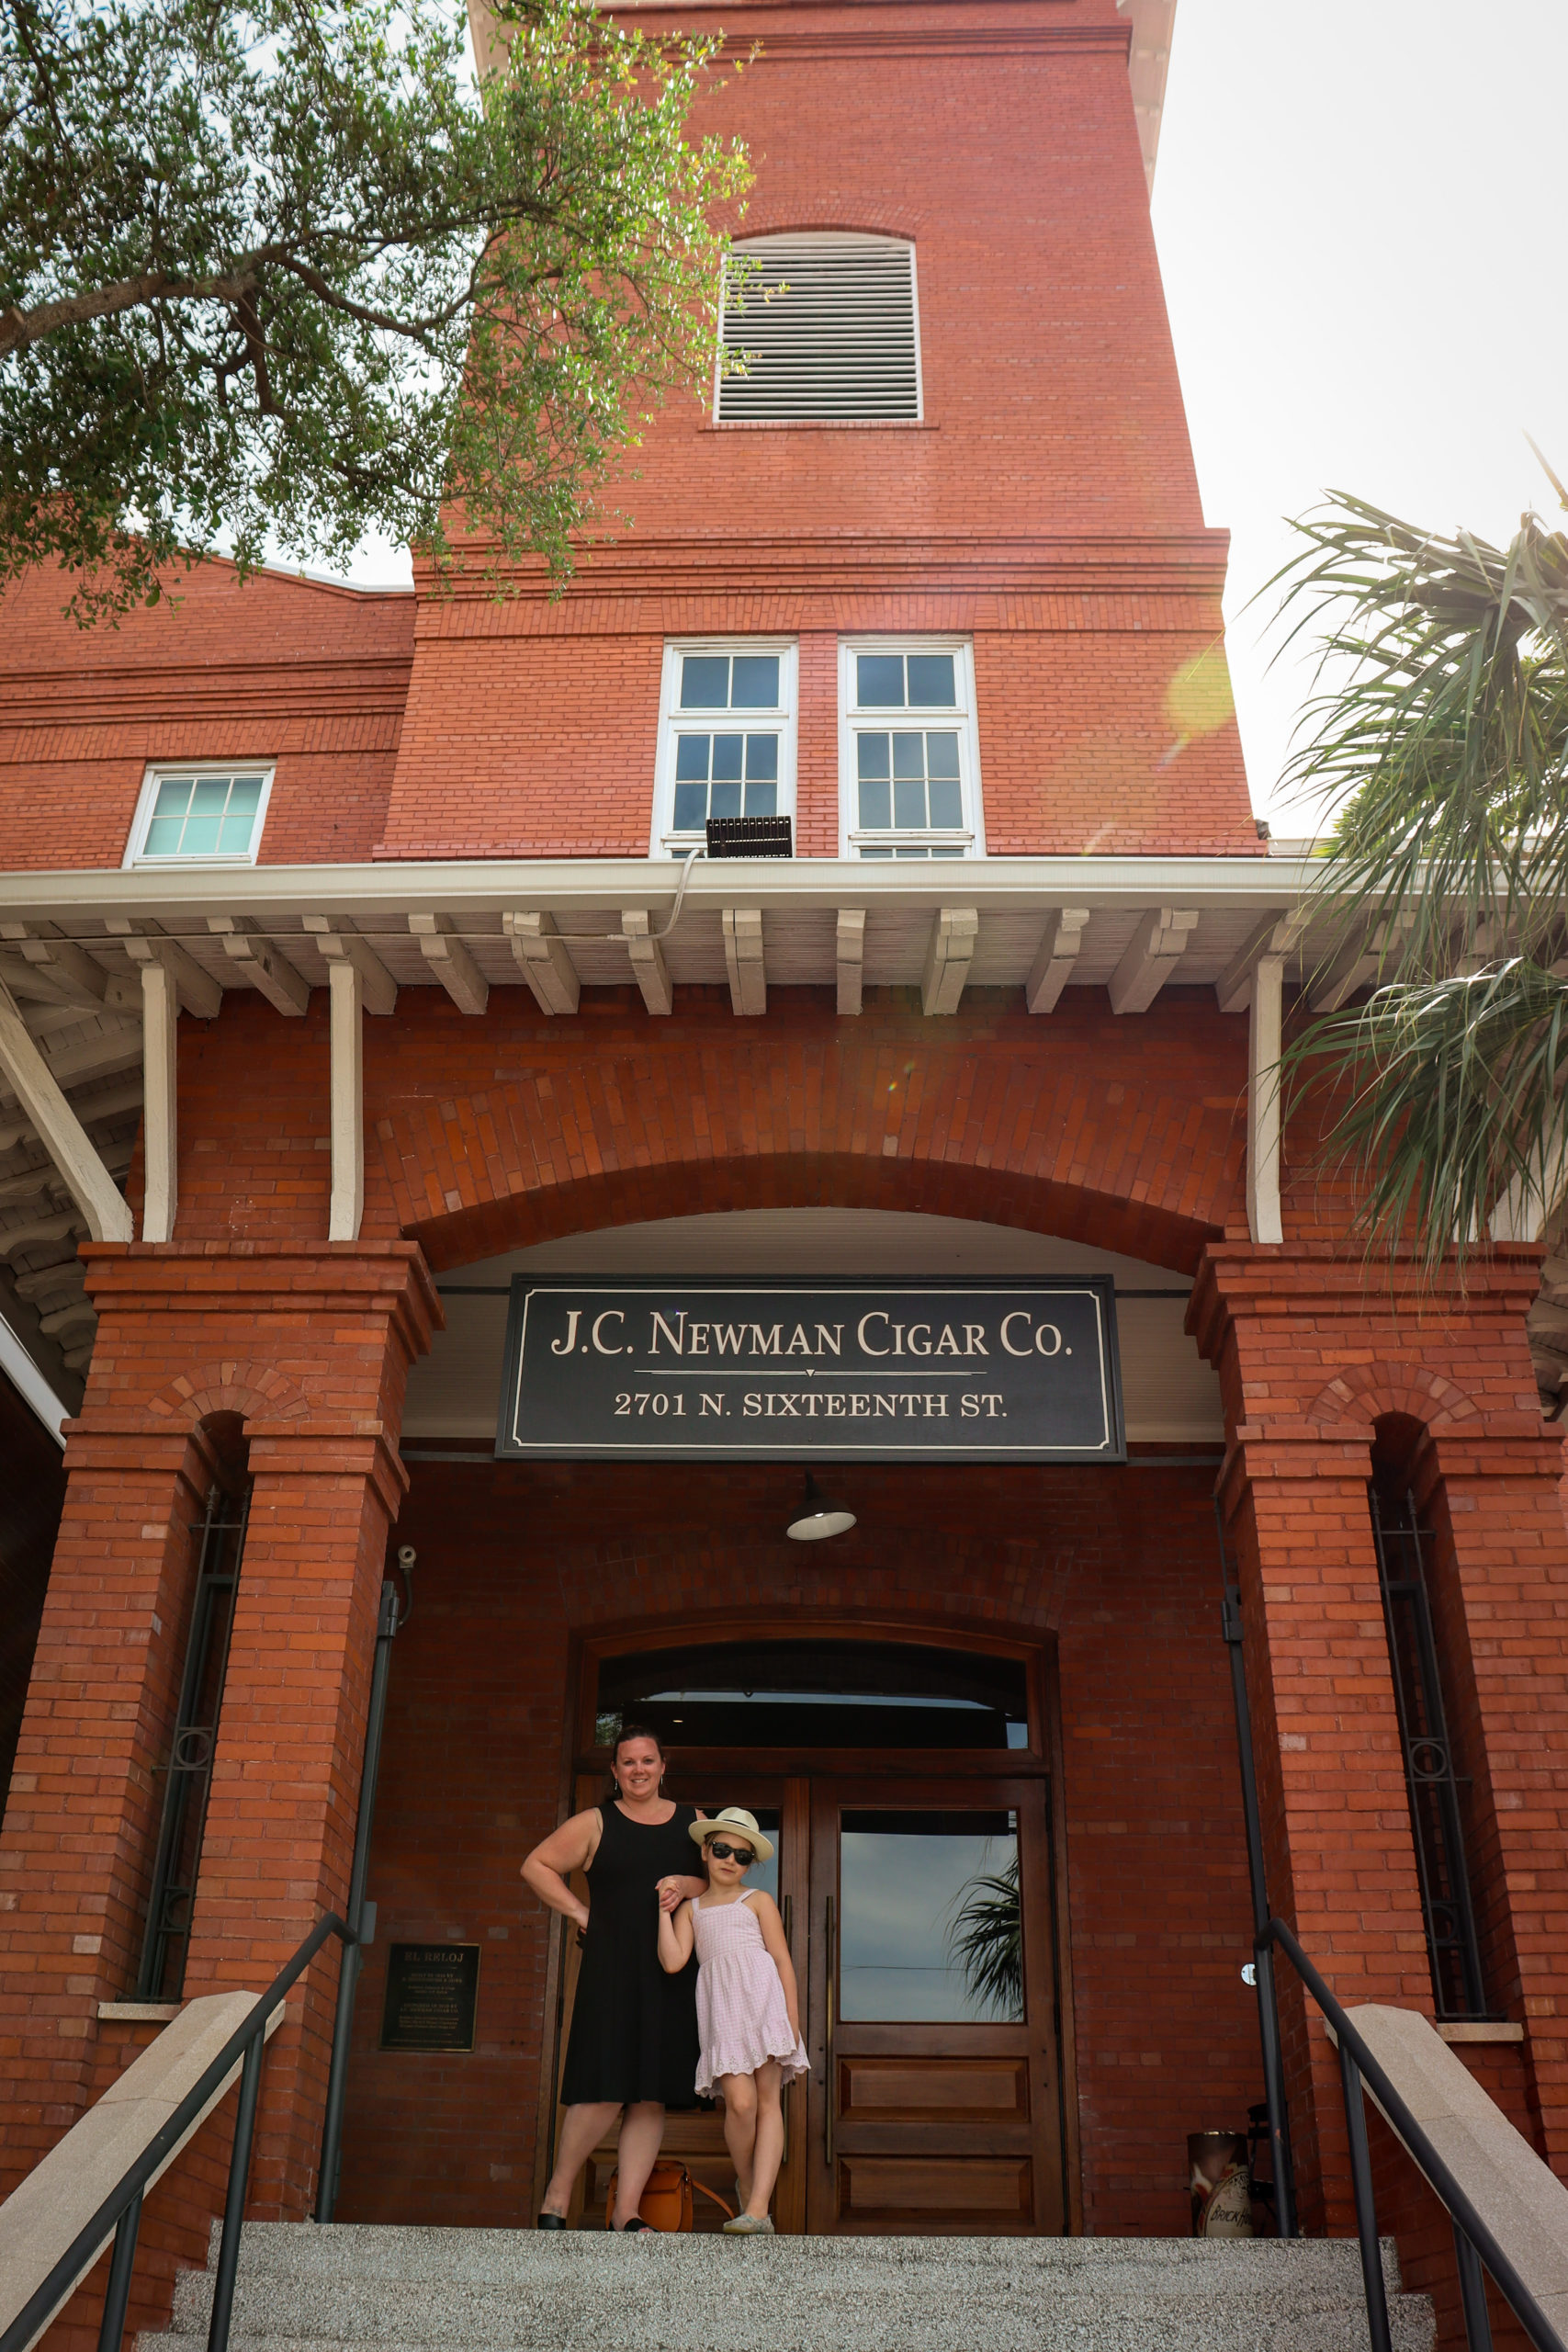 A young girl and her mom stand on the exterior steps of the J.C. Newman Cigar Co. in Ybor City.